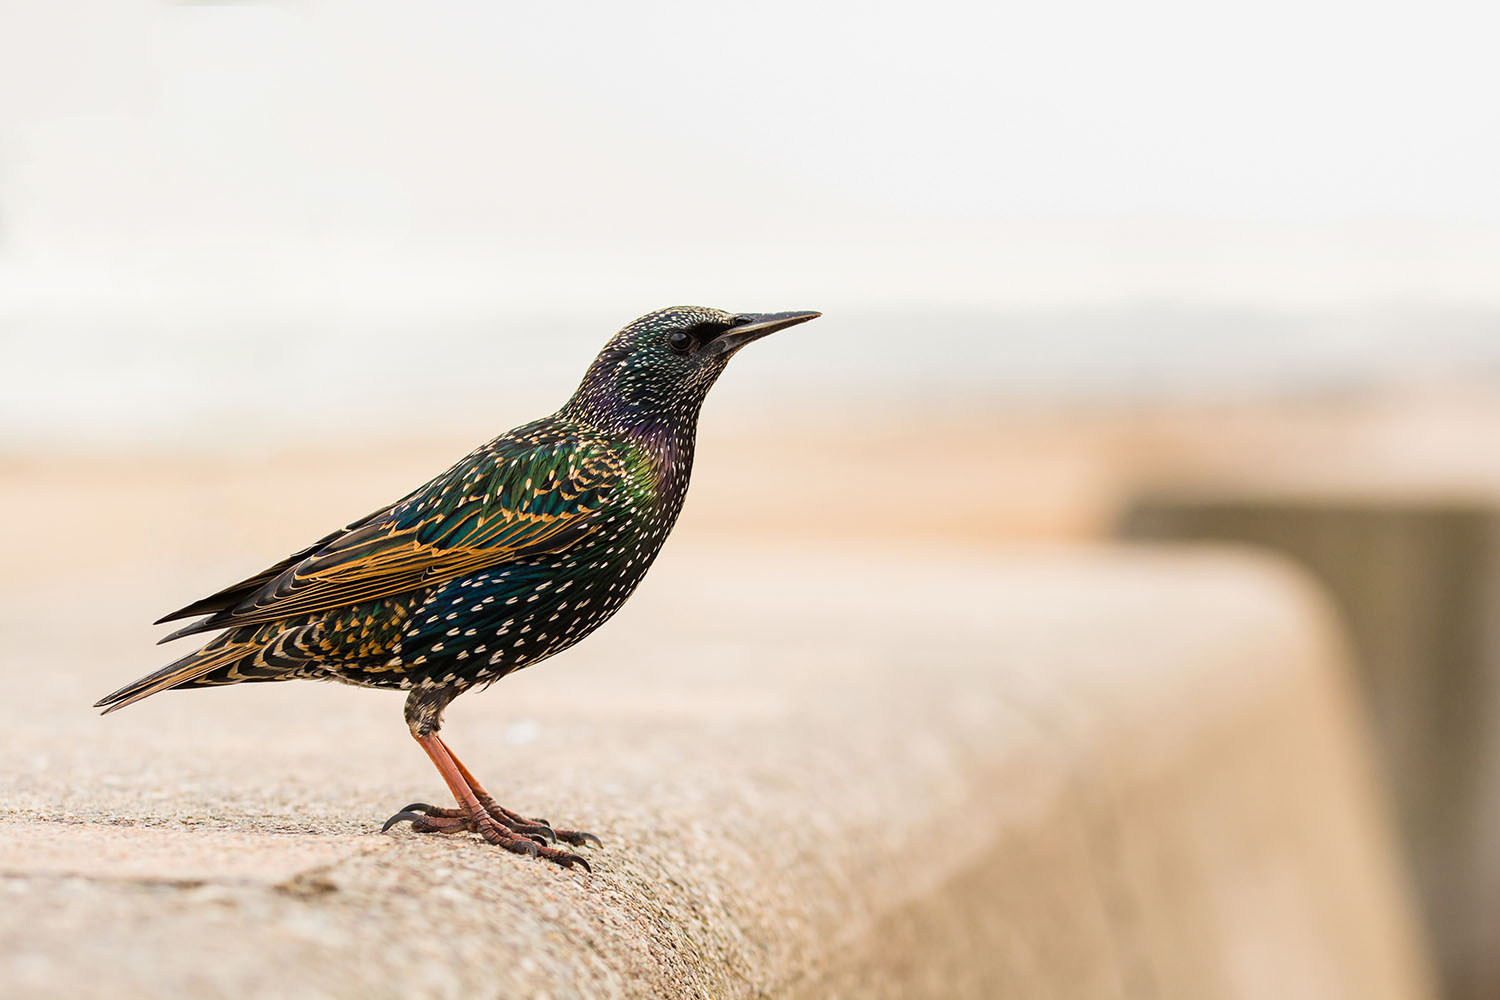 Starling perched on a wall